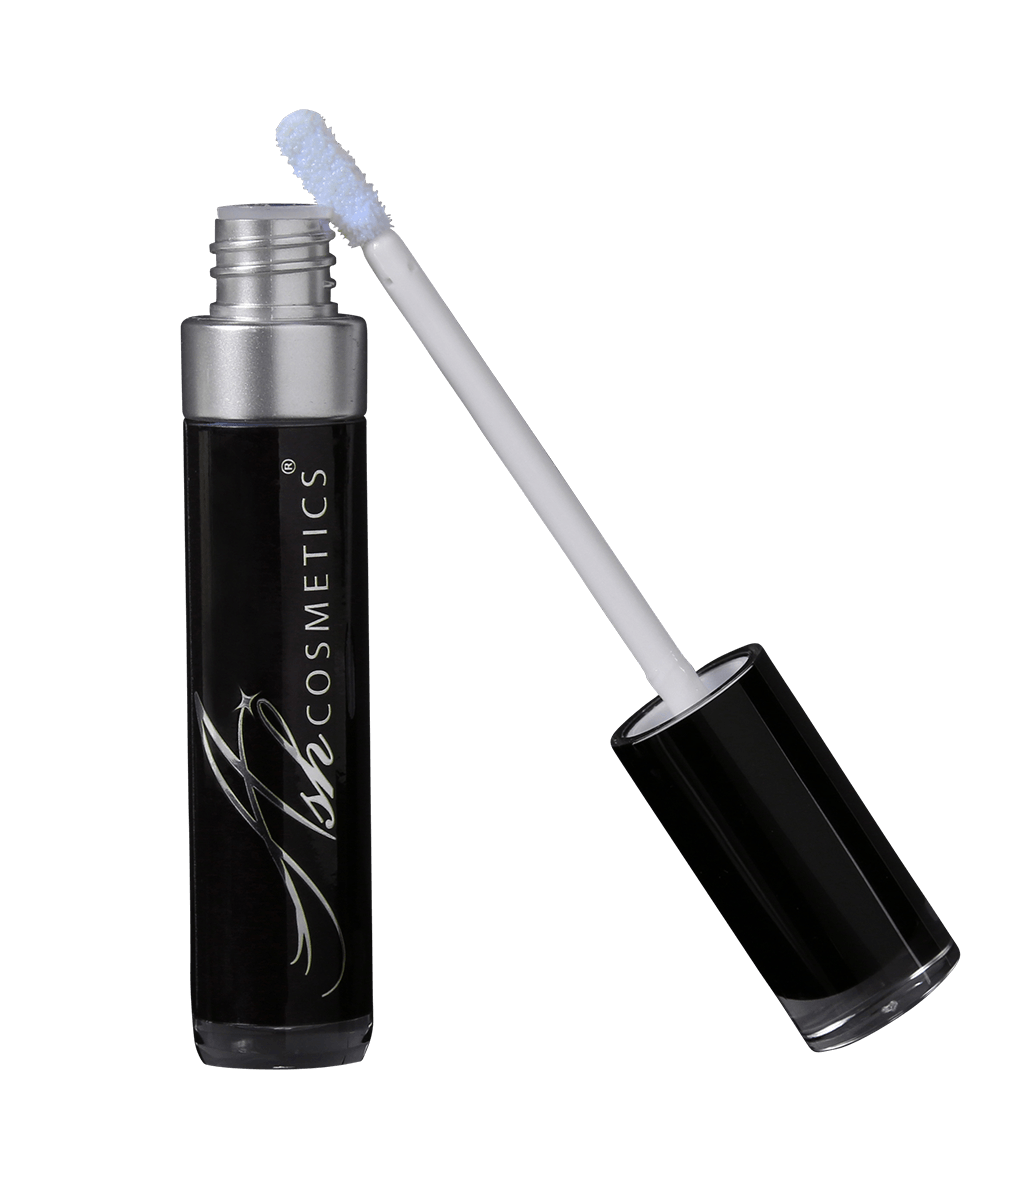 AshcosmeticsSpecial Effect Waterproof Eye, Face and Body Glitter Adhesive